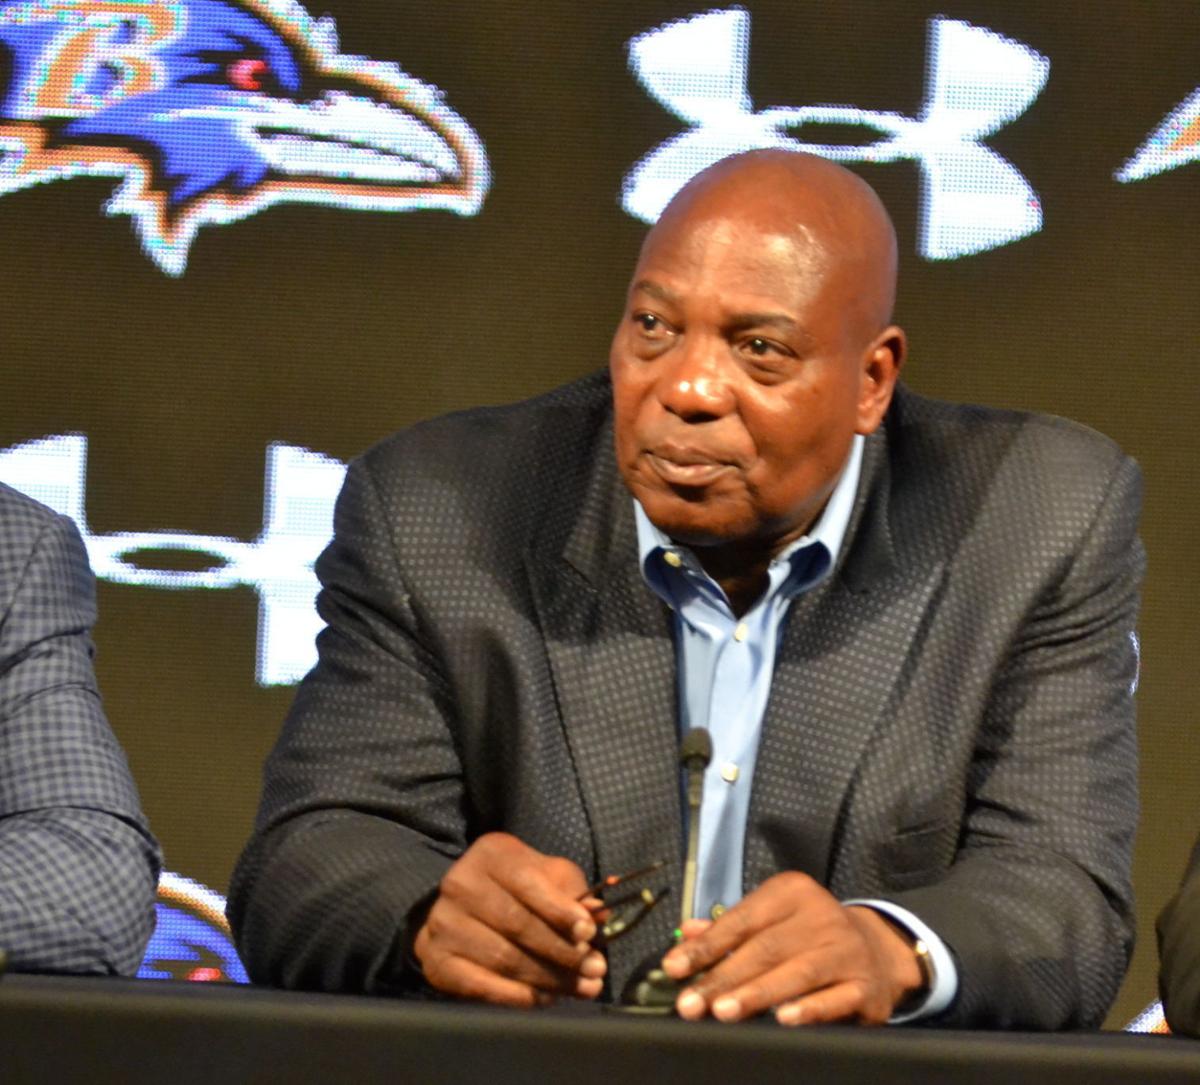 Ravens hope for draft success of previous years | Professional ...